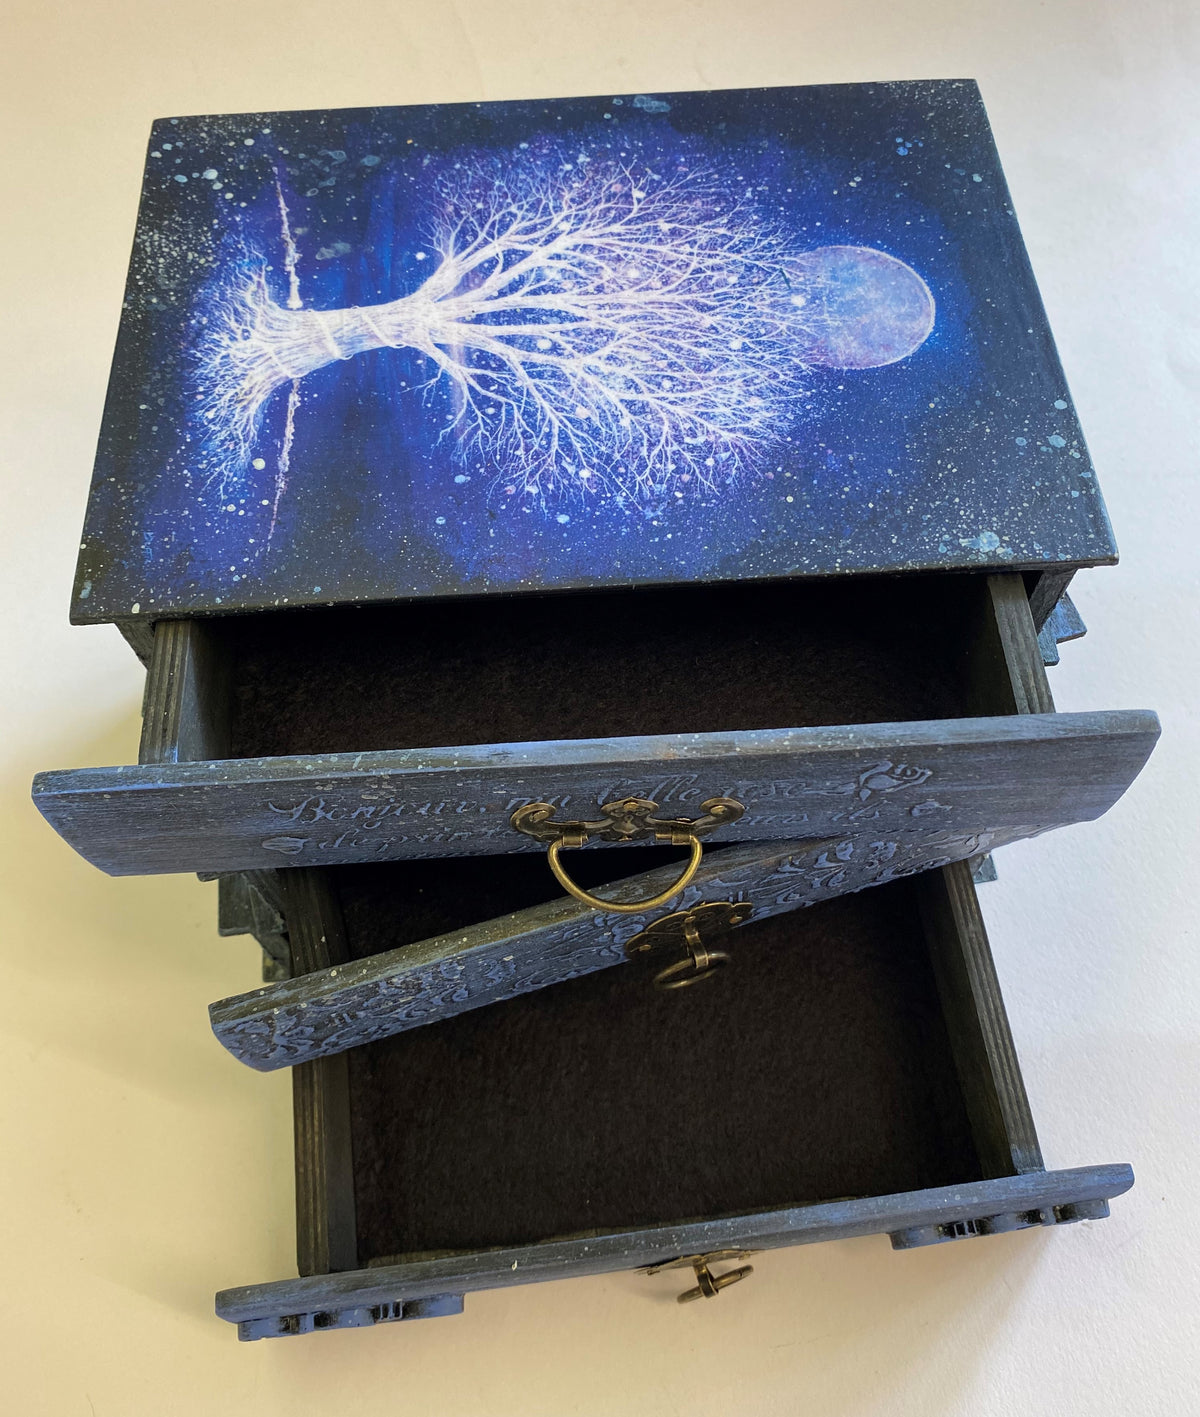 Book Shape Wooden Jewellery Drawers by Monika Maksym featuring Artwork by Mark Duffin